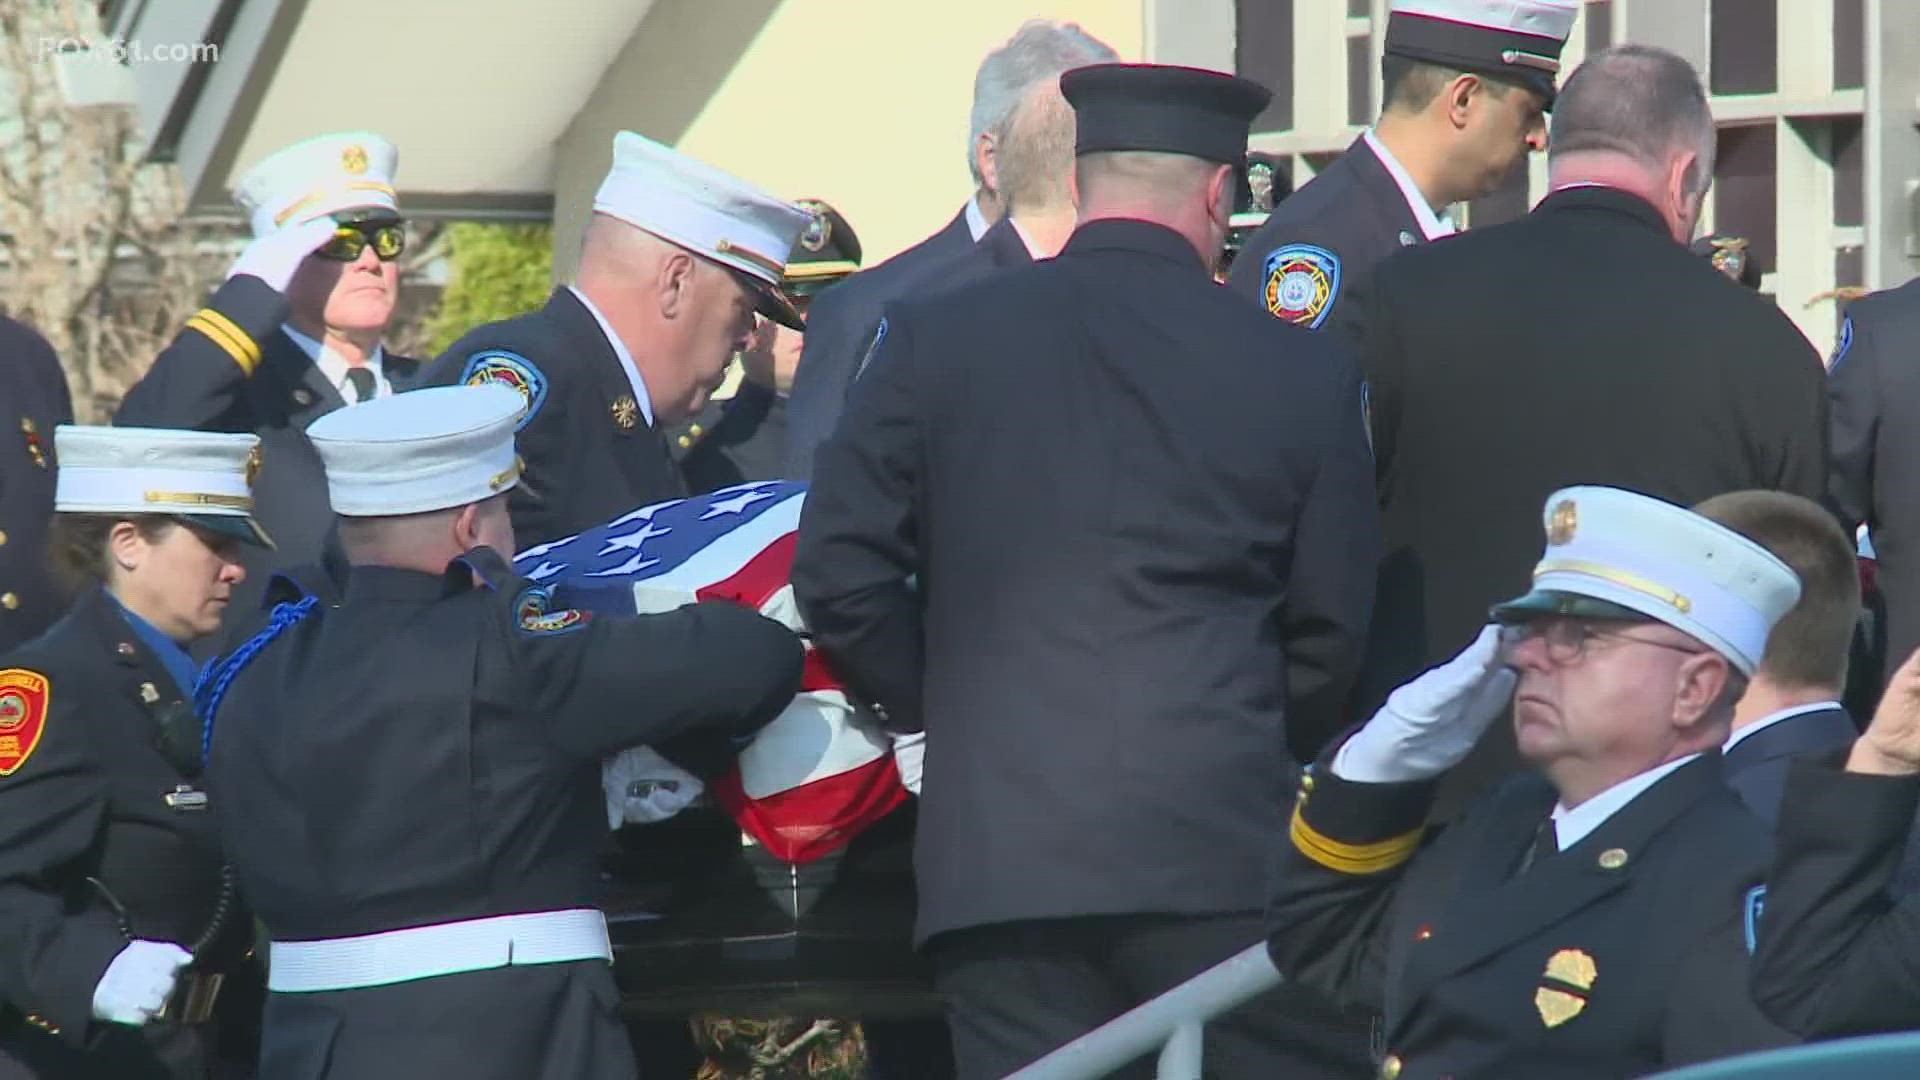 Capt. Jim Lamarre was a Rocky Hill served as a firefighter for 27 years